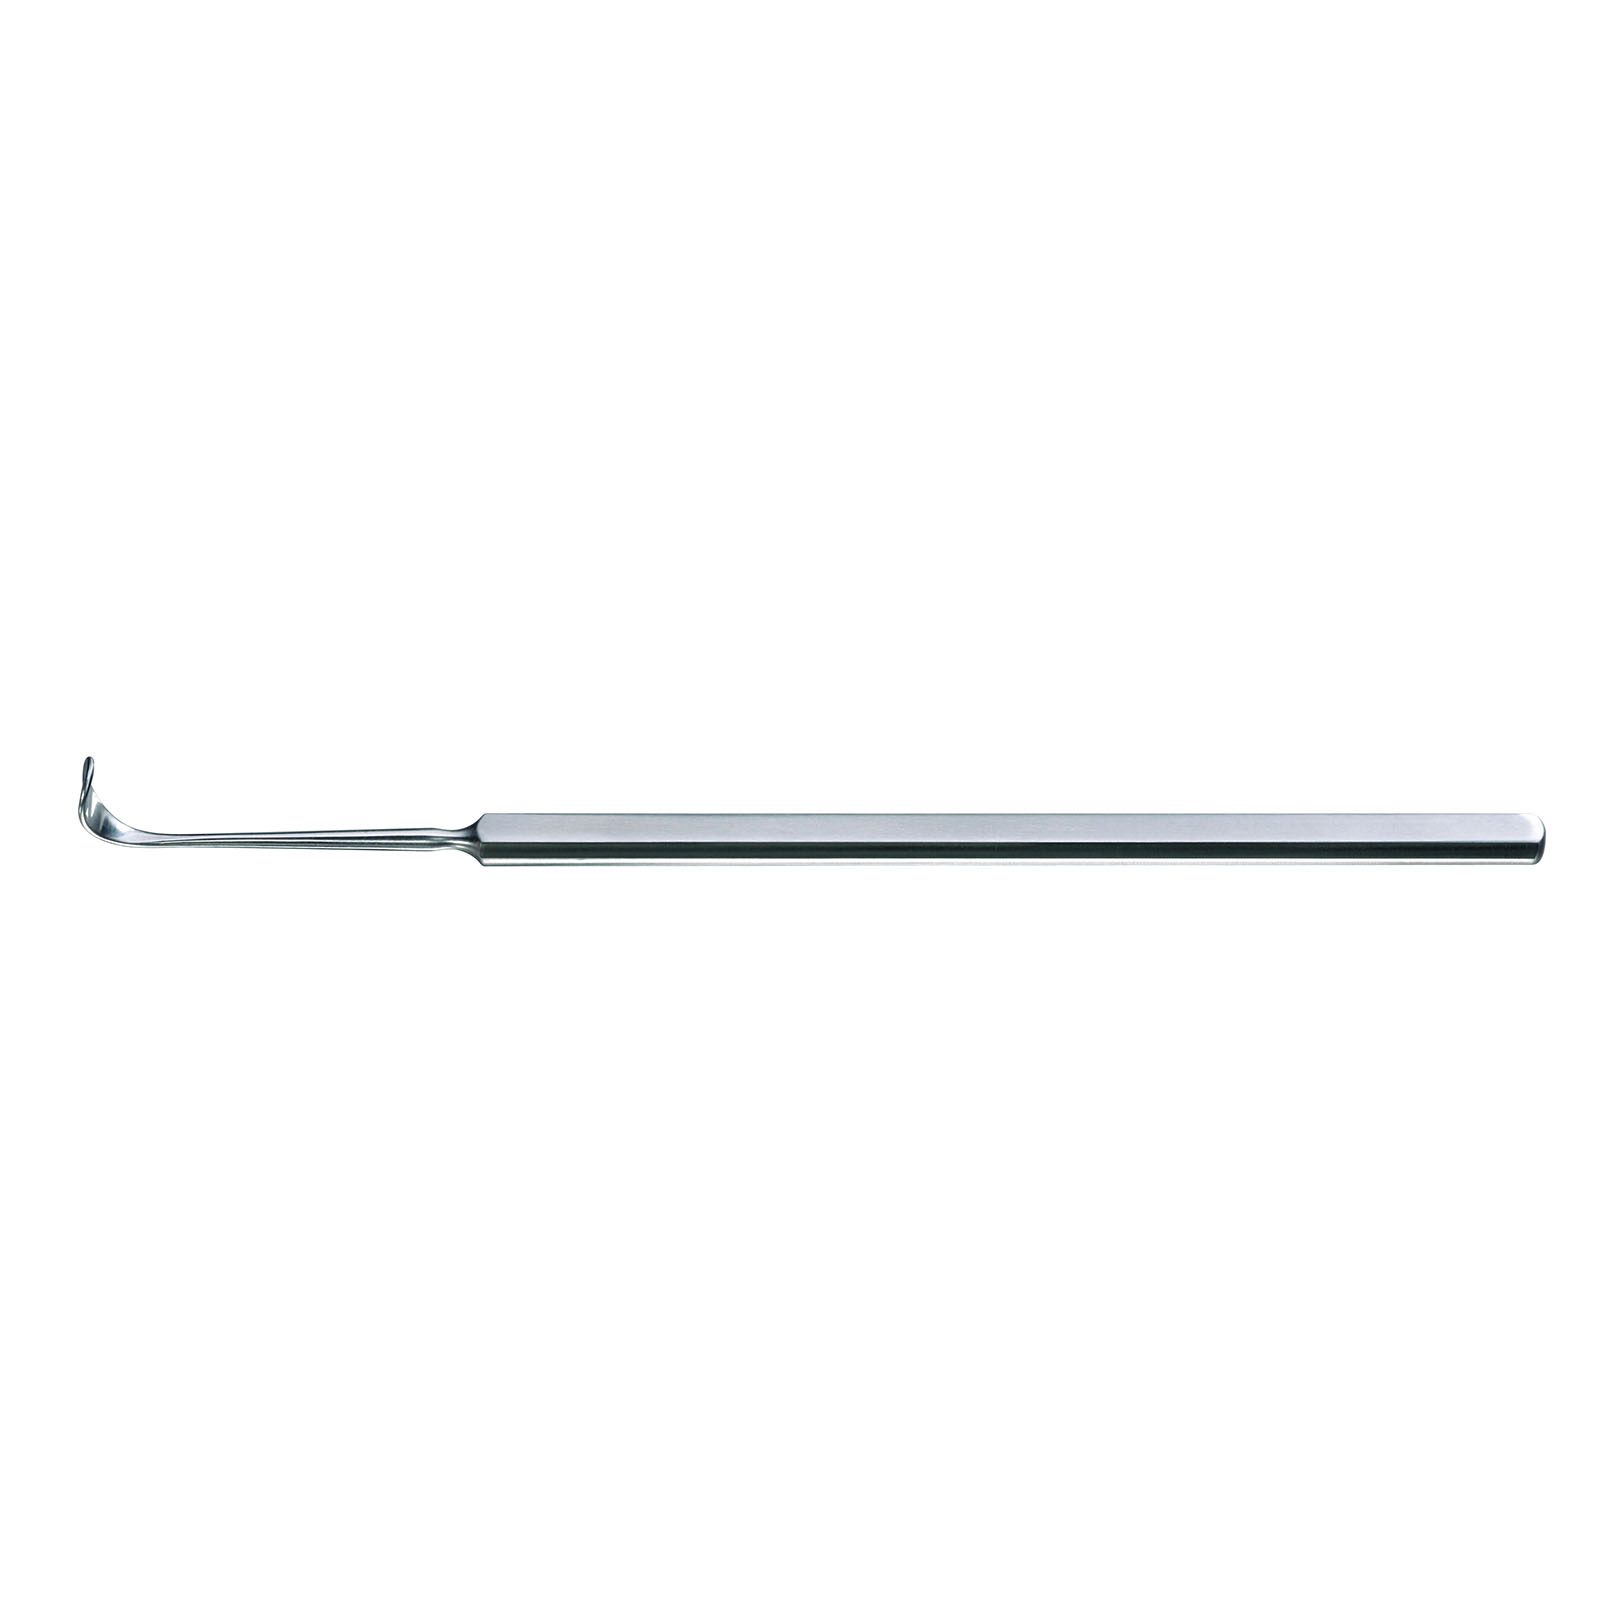 IF-8127 Stainless Steel Muscle Hook